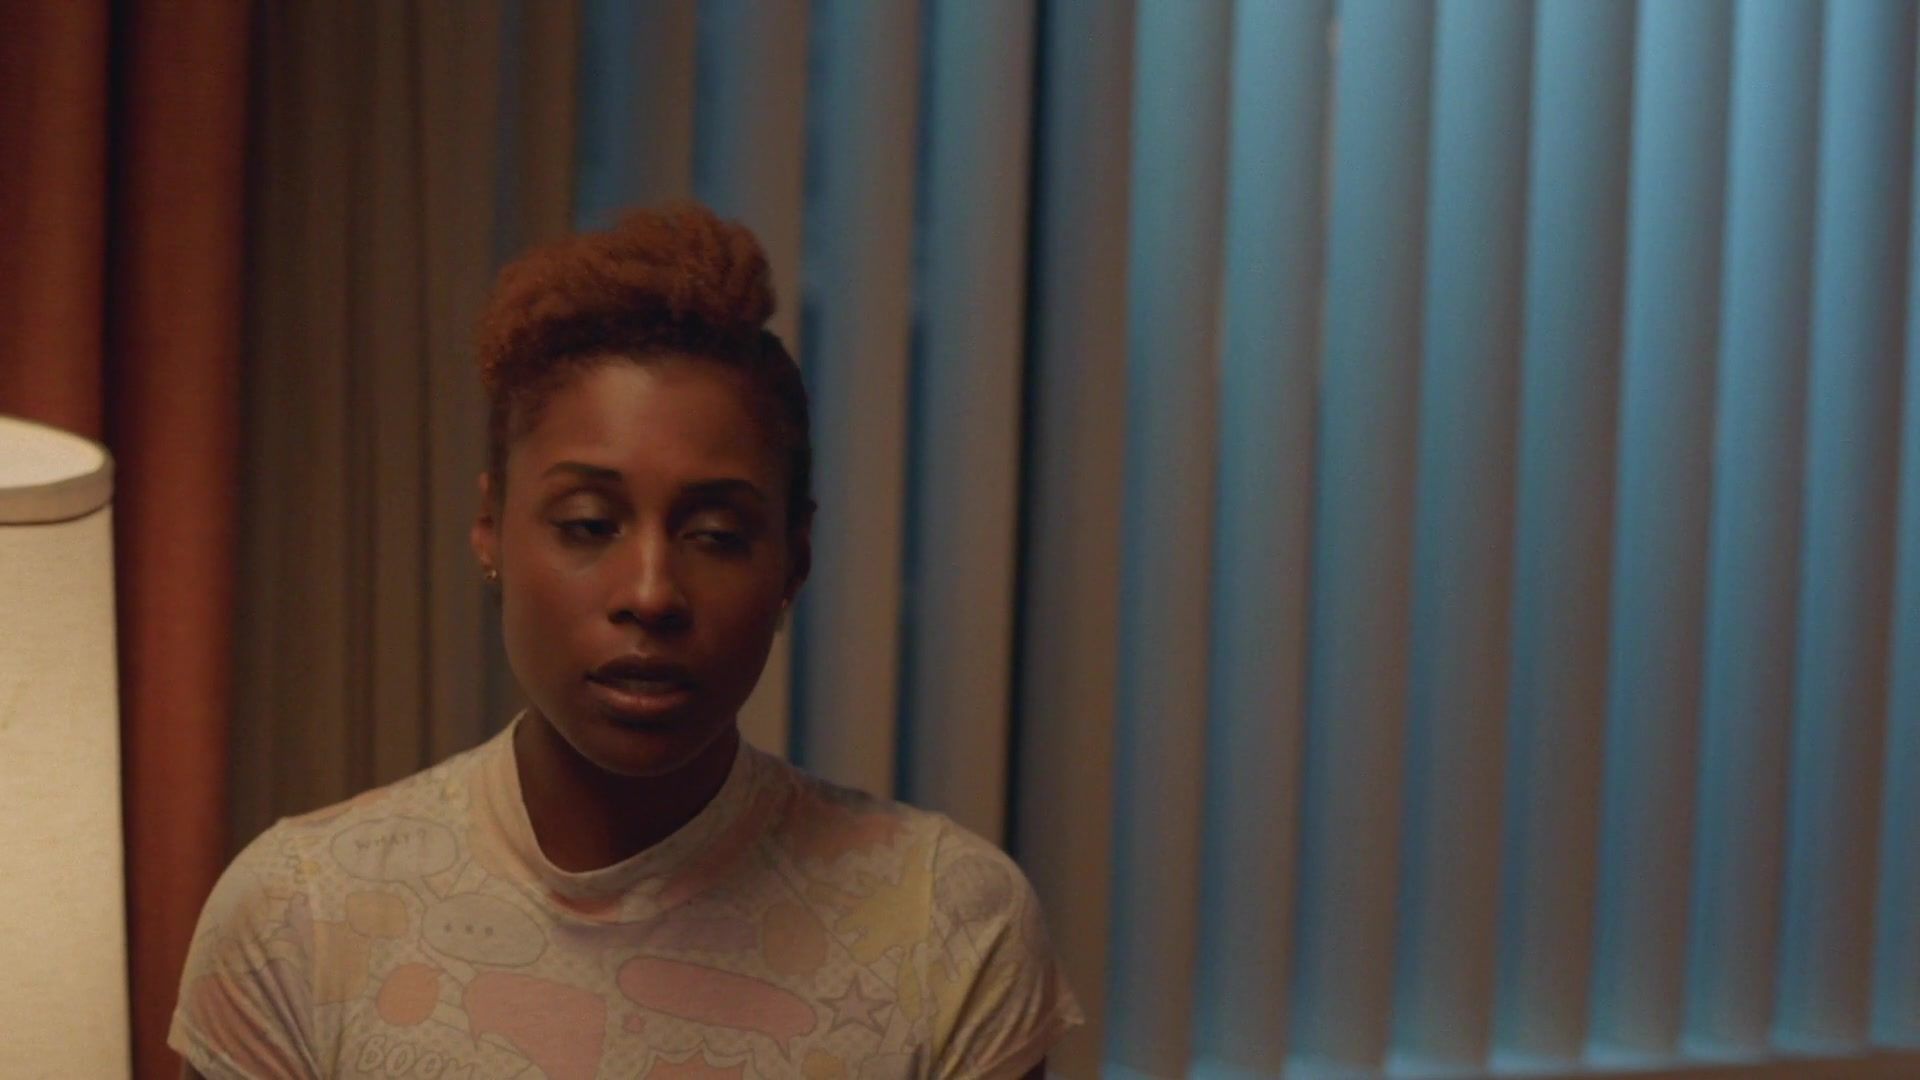 Oral Sex Domnique Perry naked, Issa Rae Naked - Insecure s02e01 (2017) NuVid - 2